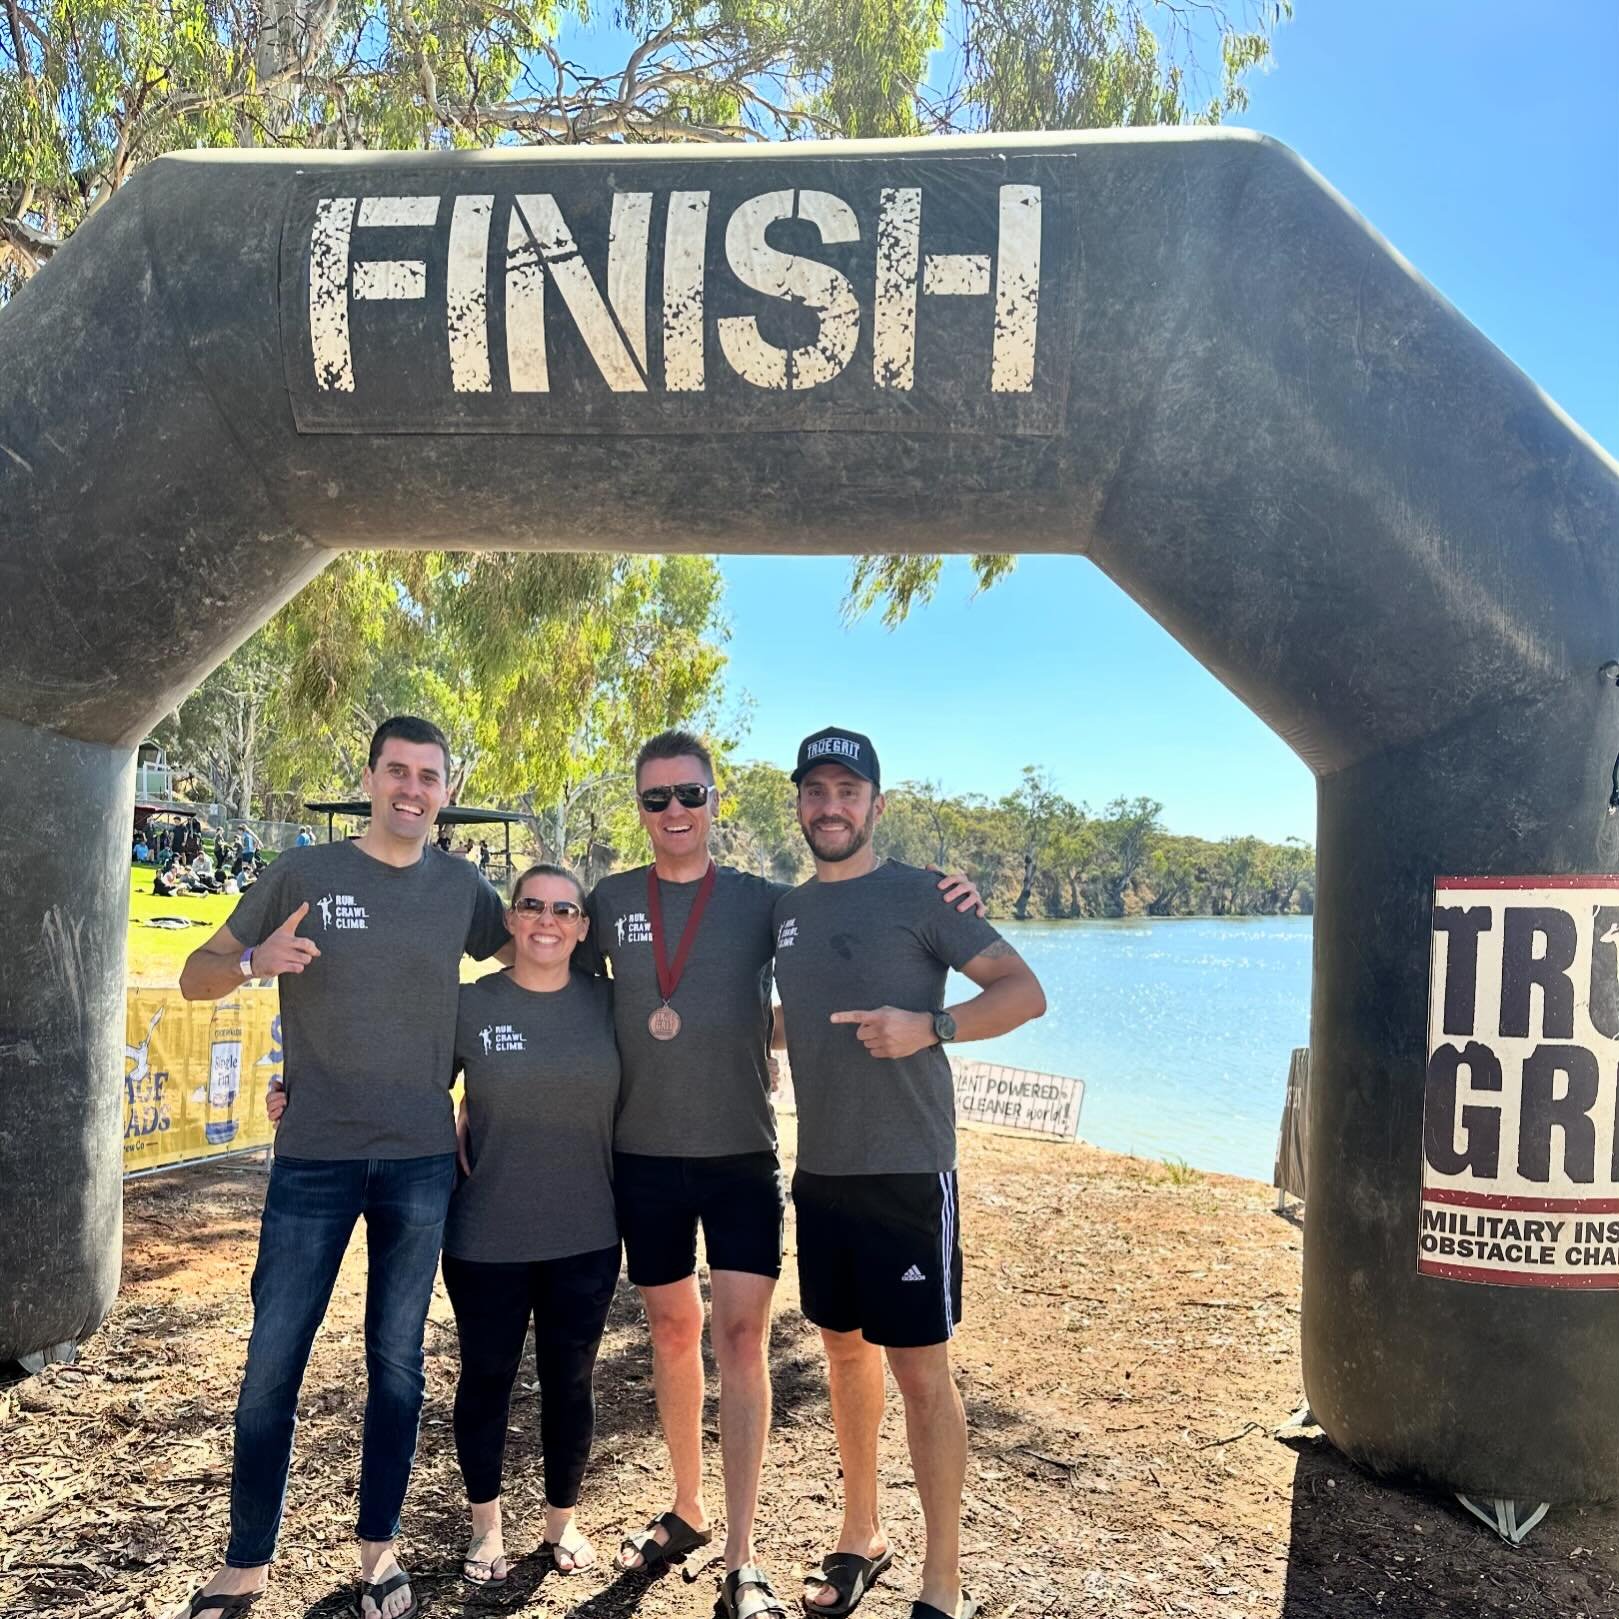 Bright Spot Friday! 
Big shout out to Lou for completing True Grit in Adelaide over the weekend! 👏 
Although she said it was &lsquo;horrific&rsquo; during - true Louise style was to stick with it and grind through with her team for 2 hours and 40 mi